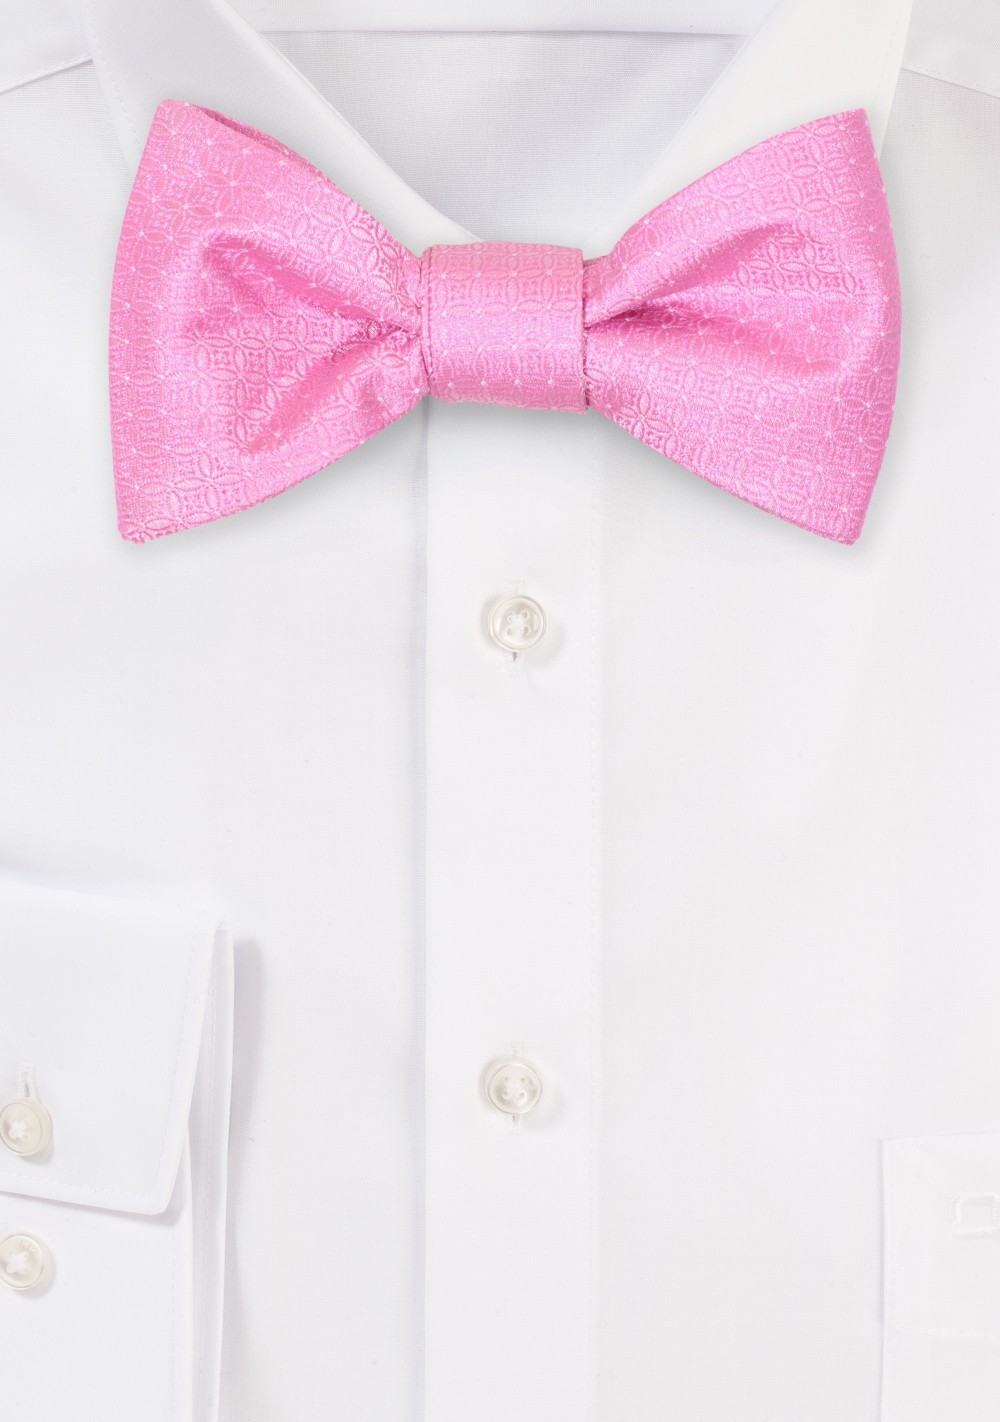 Pink Bow Tie with Solid Checkered Weave